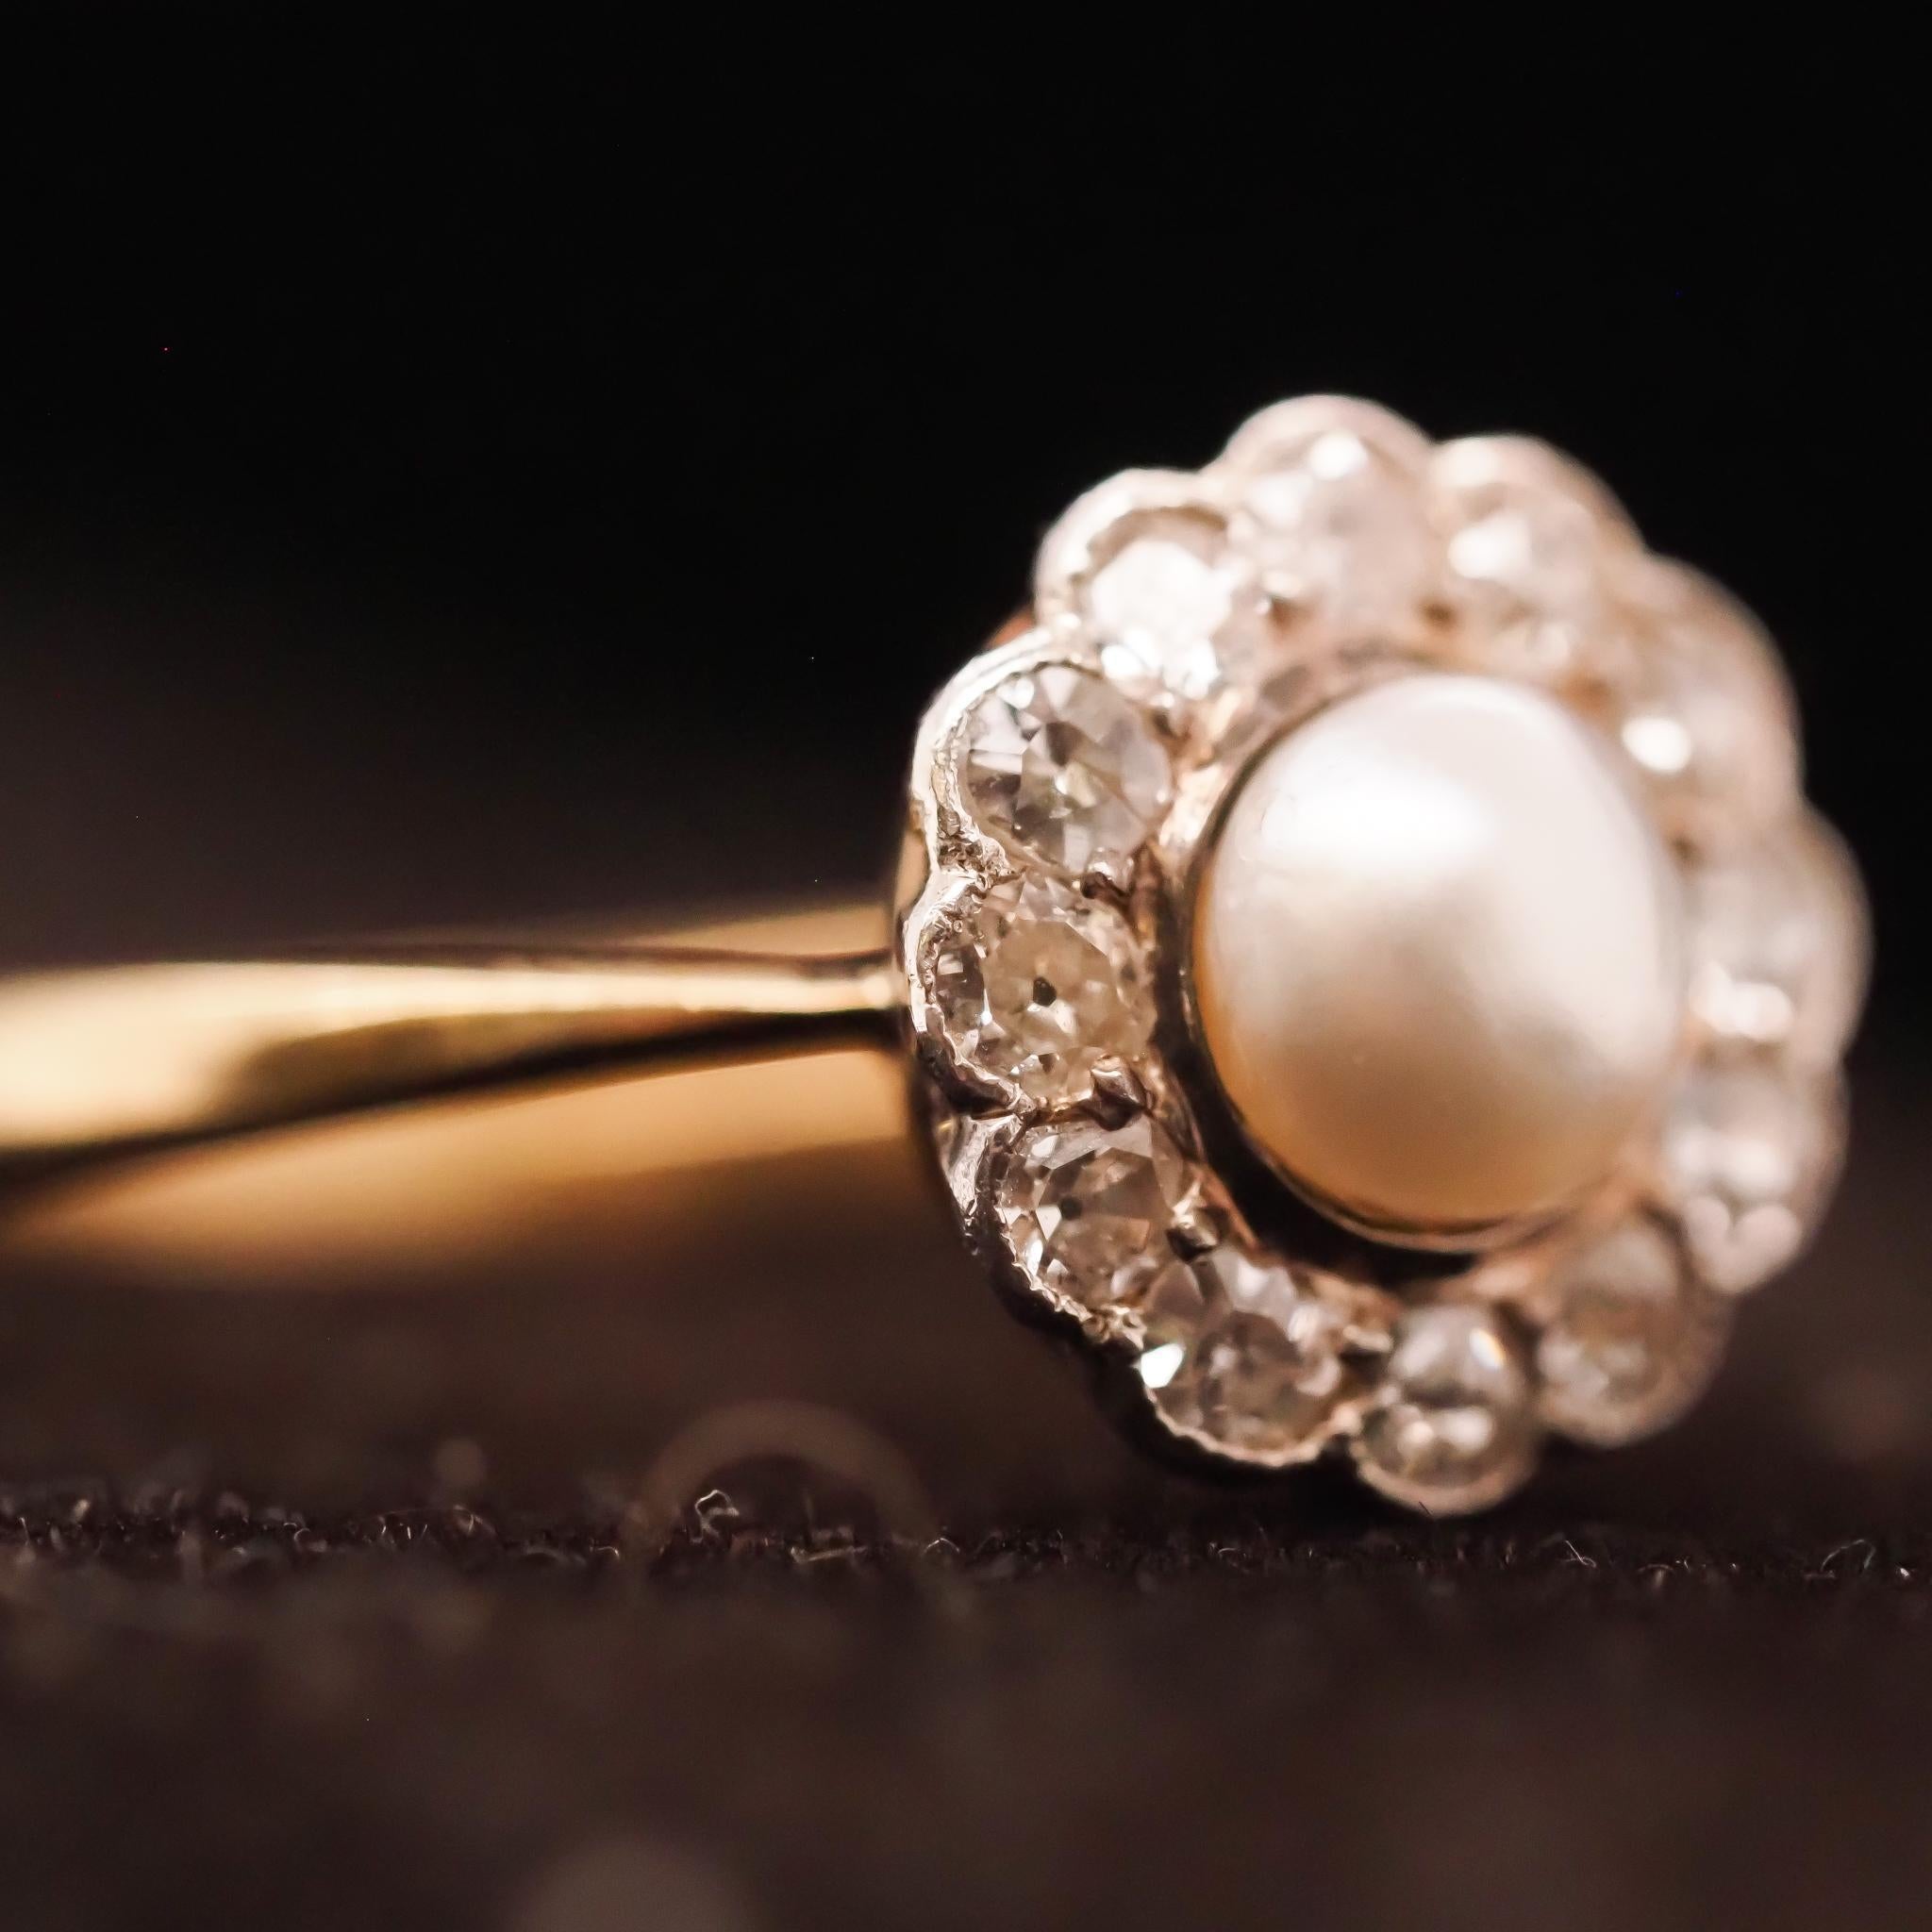 Year: Early 1900s
Item Details:
Ring Size: 6.75
Metal Type: [Hallmarked, and Tested]
Weight: 3.0grams
Diamond Details: Old European Brilliant, .25ct total weight, G Color, VS Clarity.
Pearl Details: Natural Pearl, 5.5mm, Pinkish Luster
Band Width: